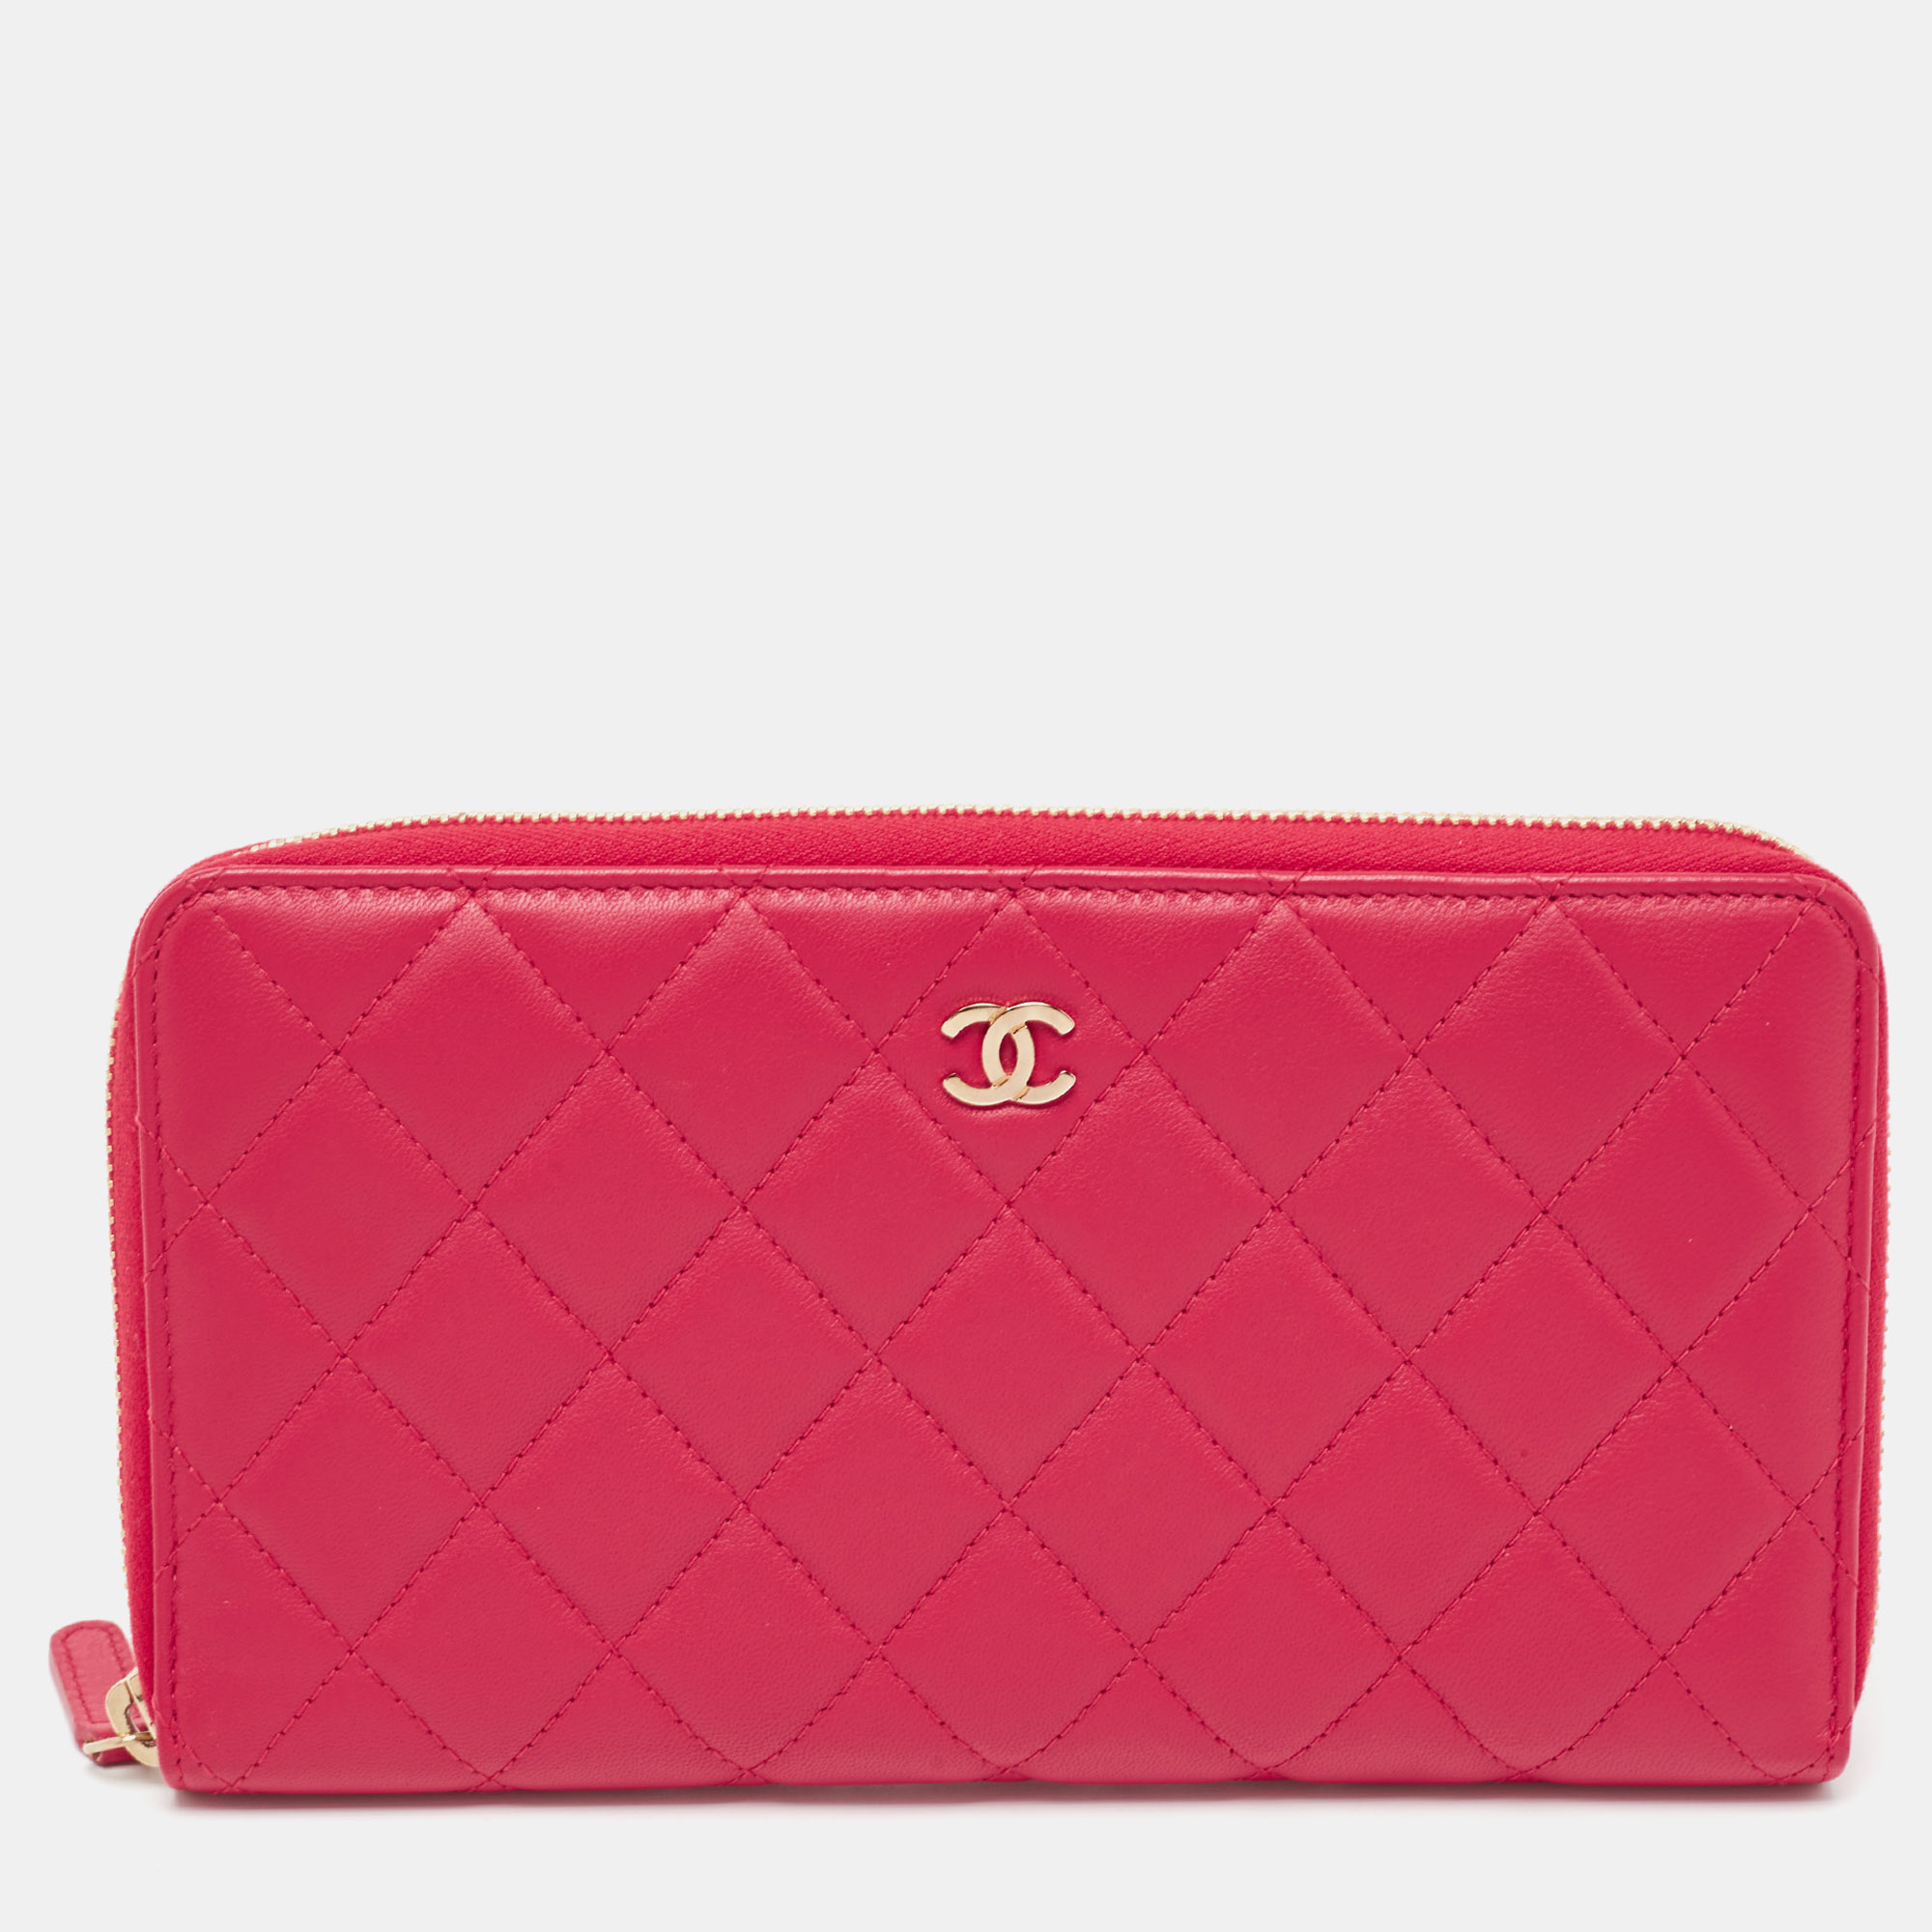 Pre-owned Chanel Pink Quilted Leather Zip Around Organizer Wallet